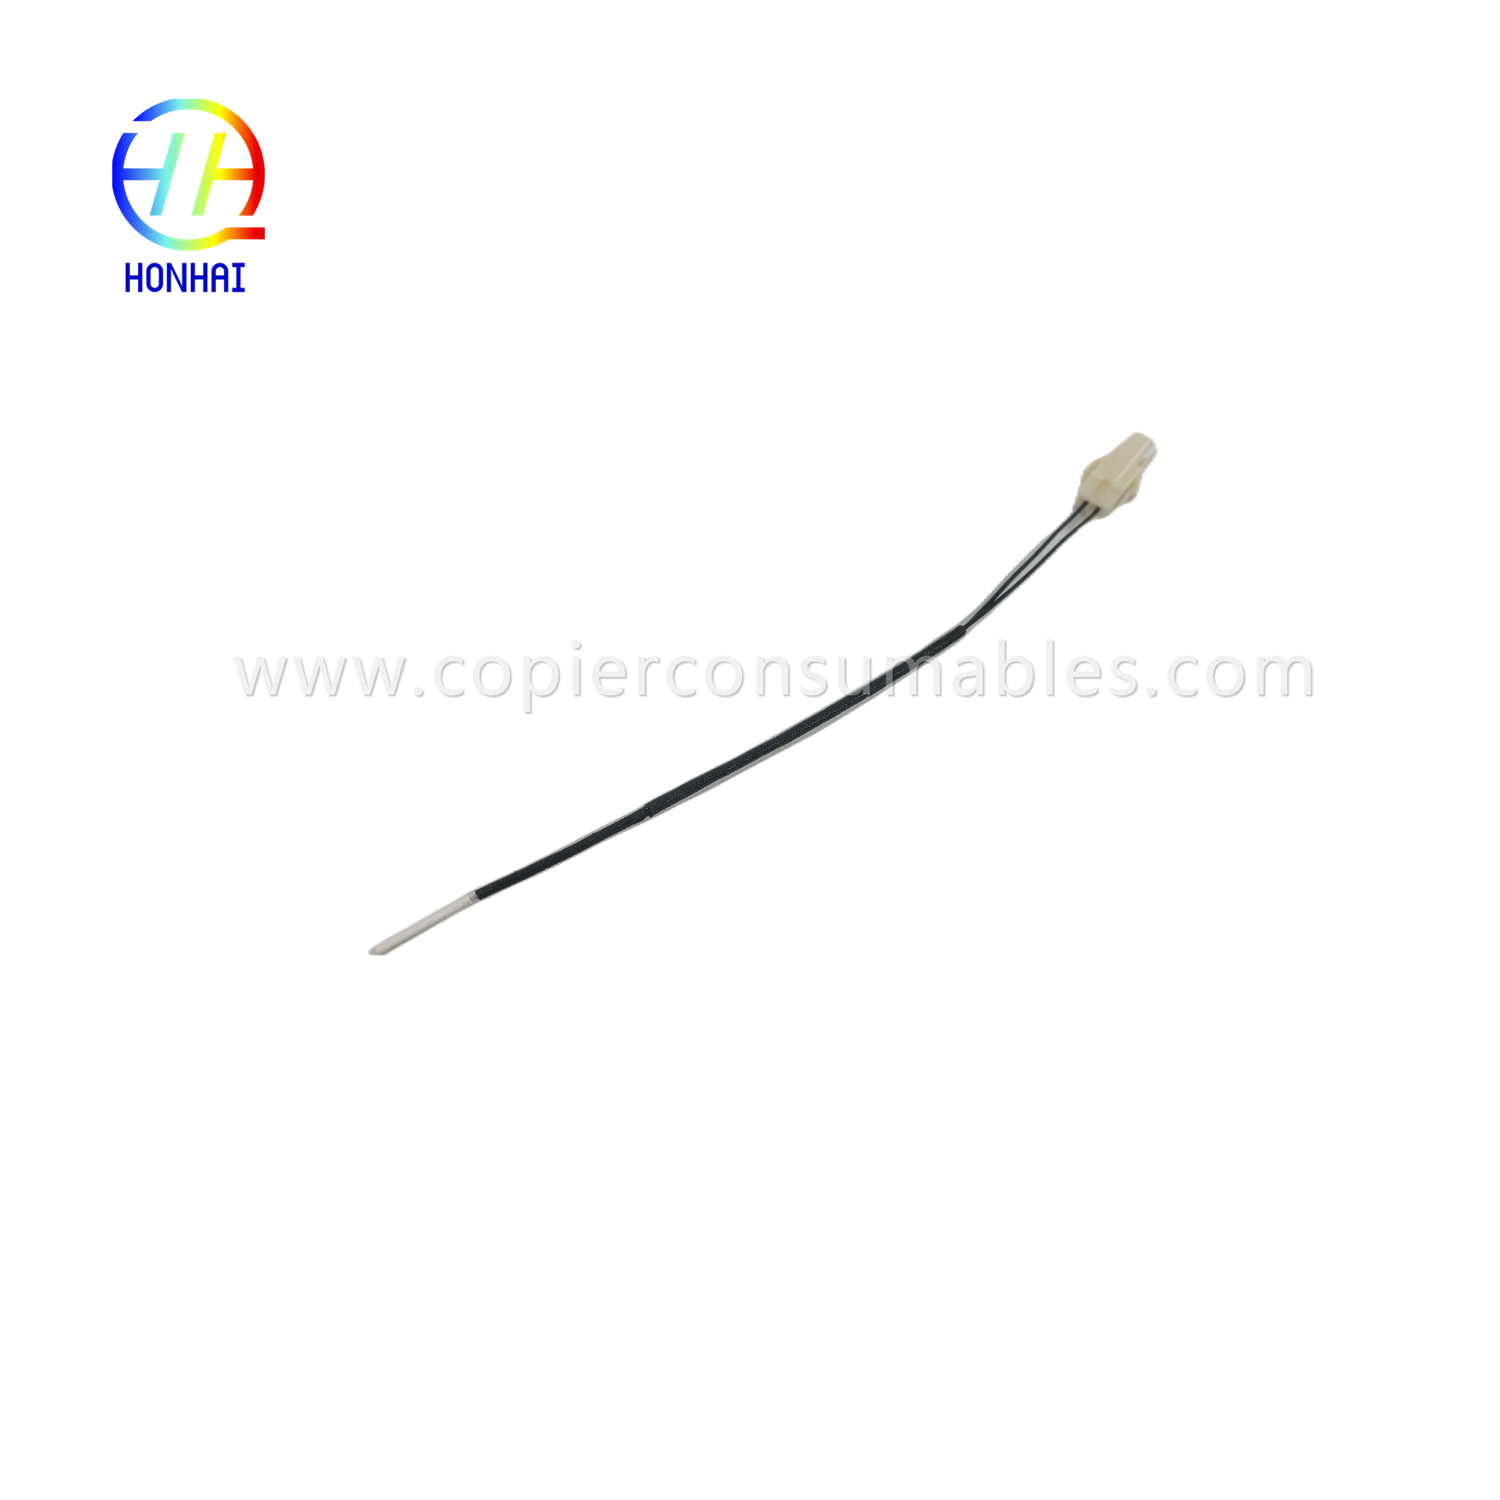 Fuser Thermistor for OCE Pw300 340 350 360 365 TDS100 320 400 450 500 7050 9300 9400 (၂)၊